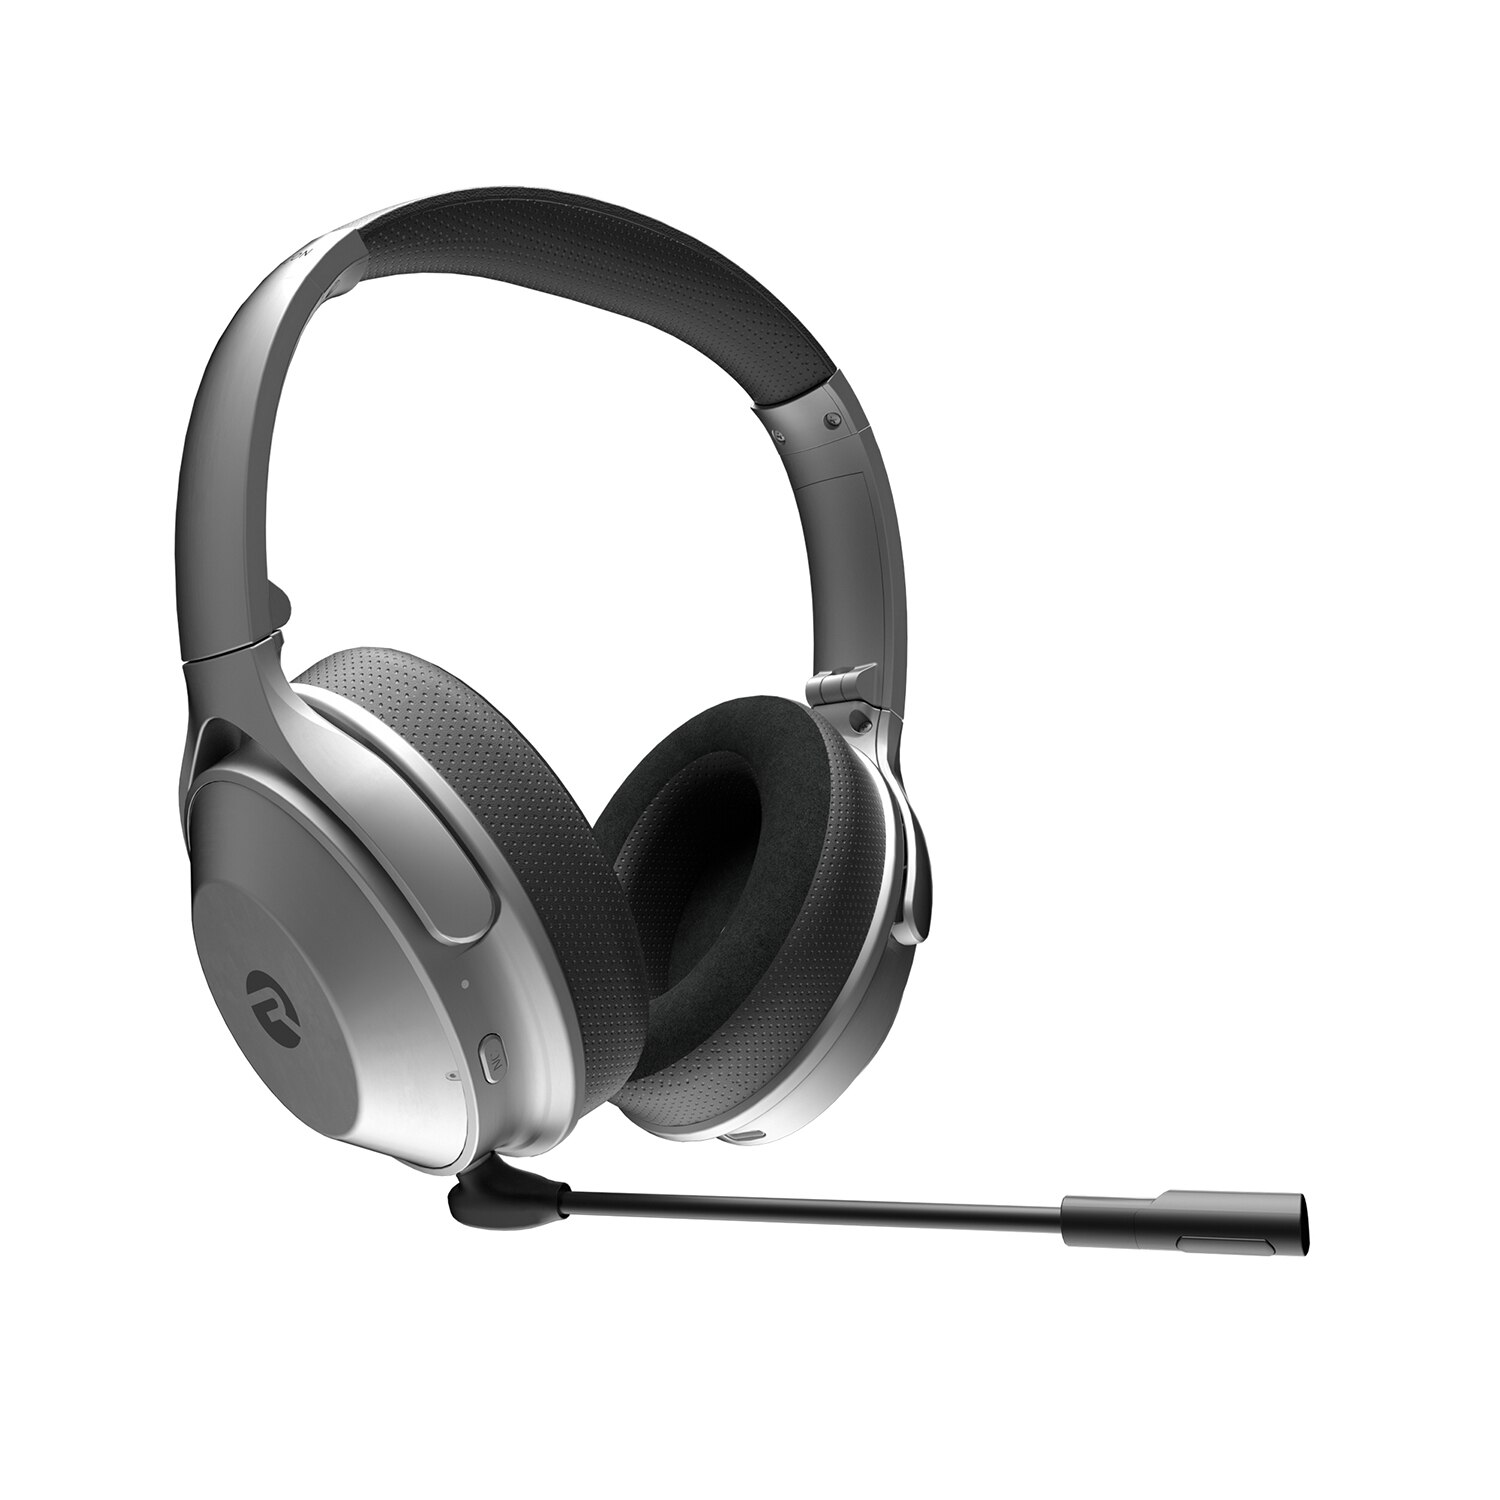 The Gaming Headphones- Silver